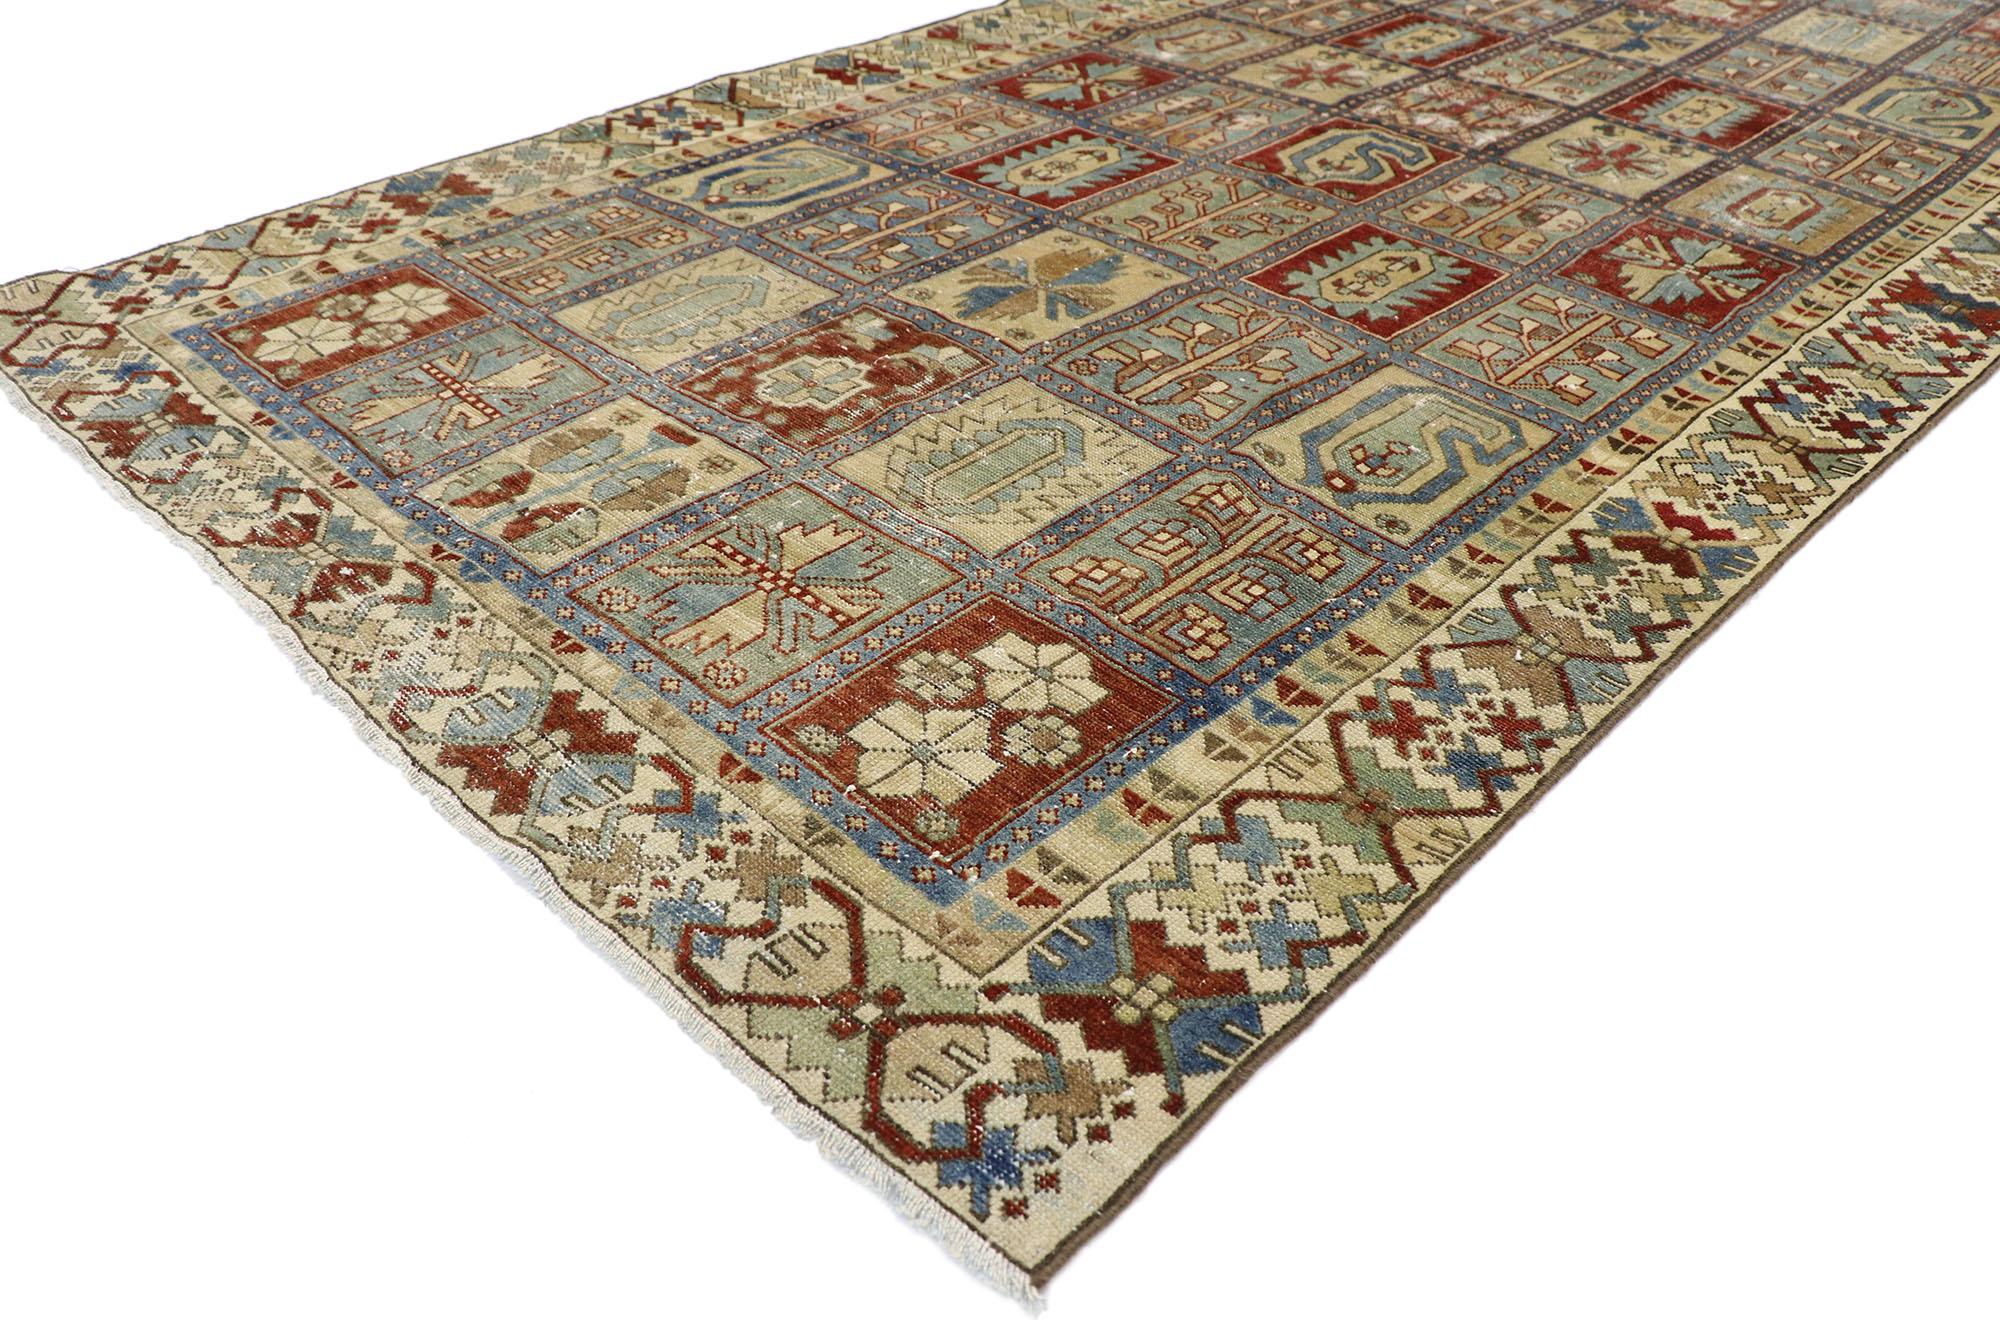 60819, distressed antique Persian Bakhtiari rug with modern rustic style. Cleverly composed and distinctively well-balanced, this hand knotted wool distressed antique Persian Bakhtiari rug will take on a curated lived-in look that feels timeless